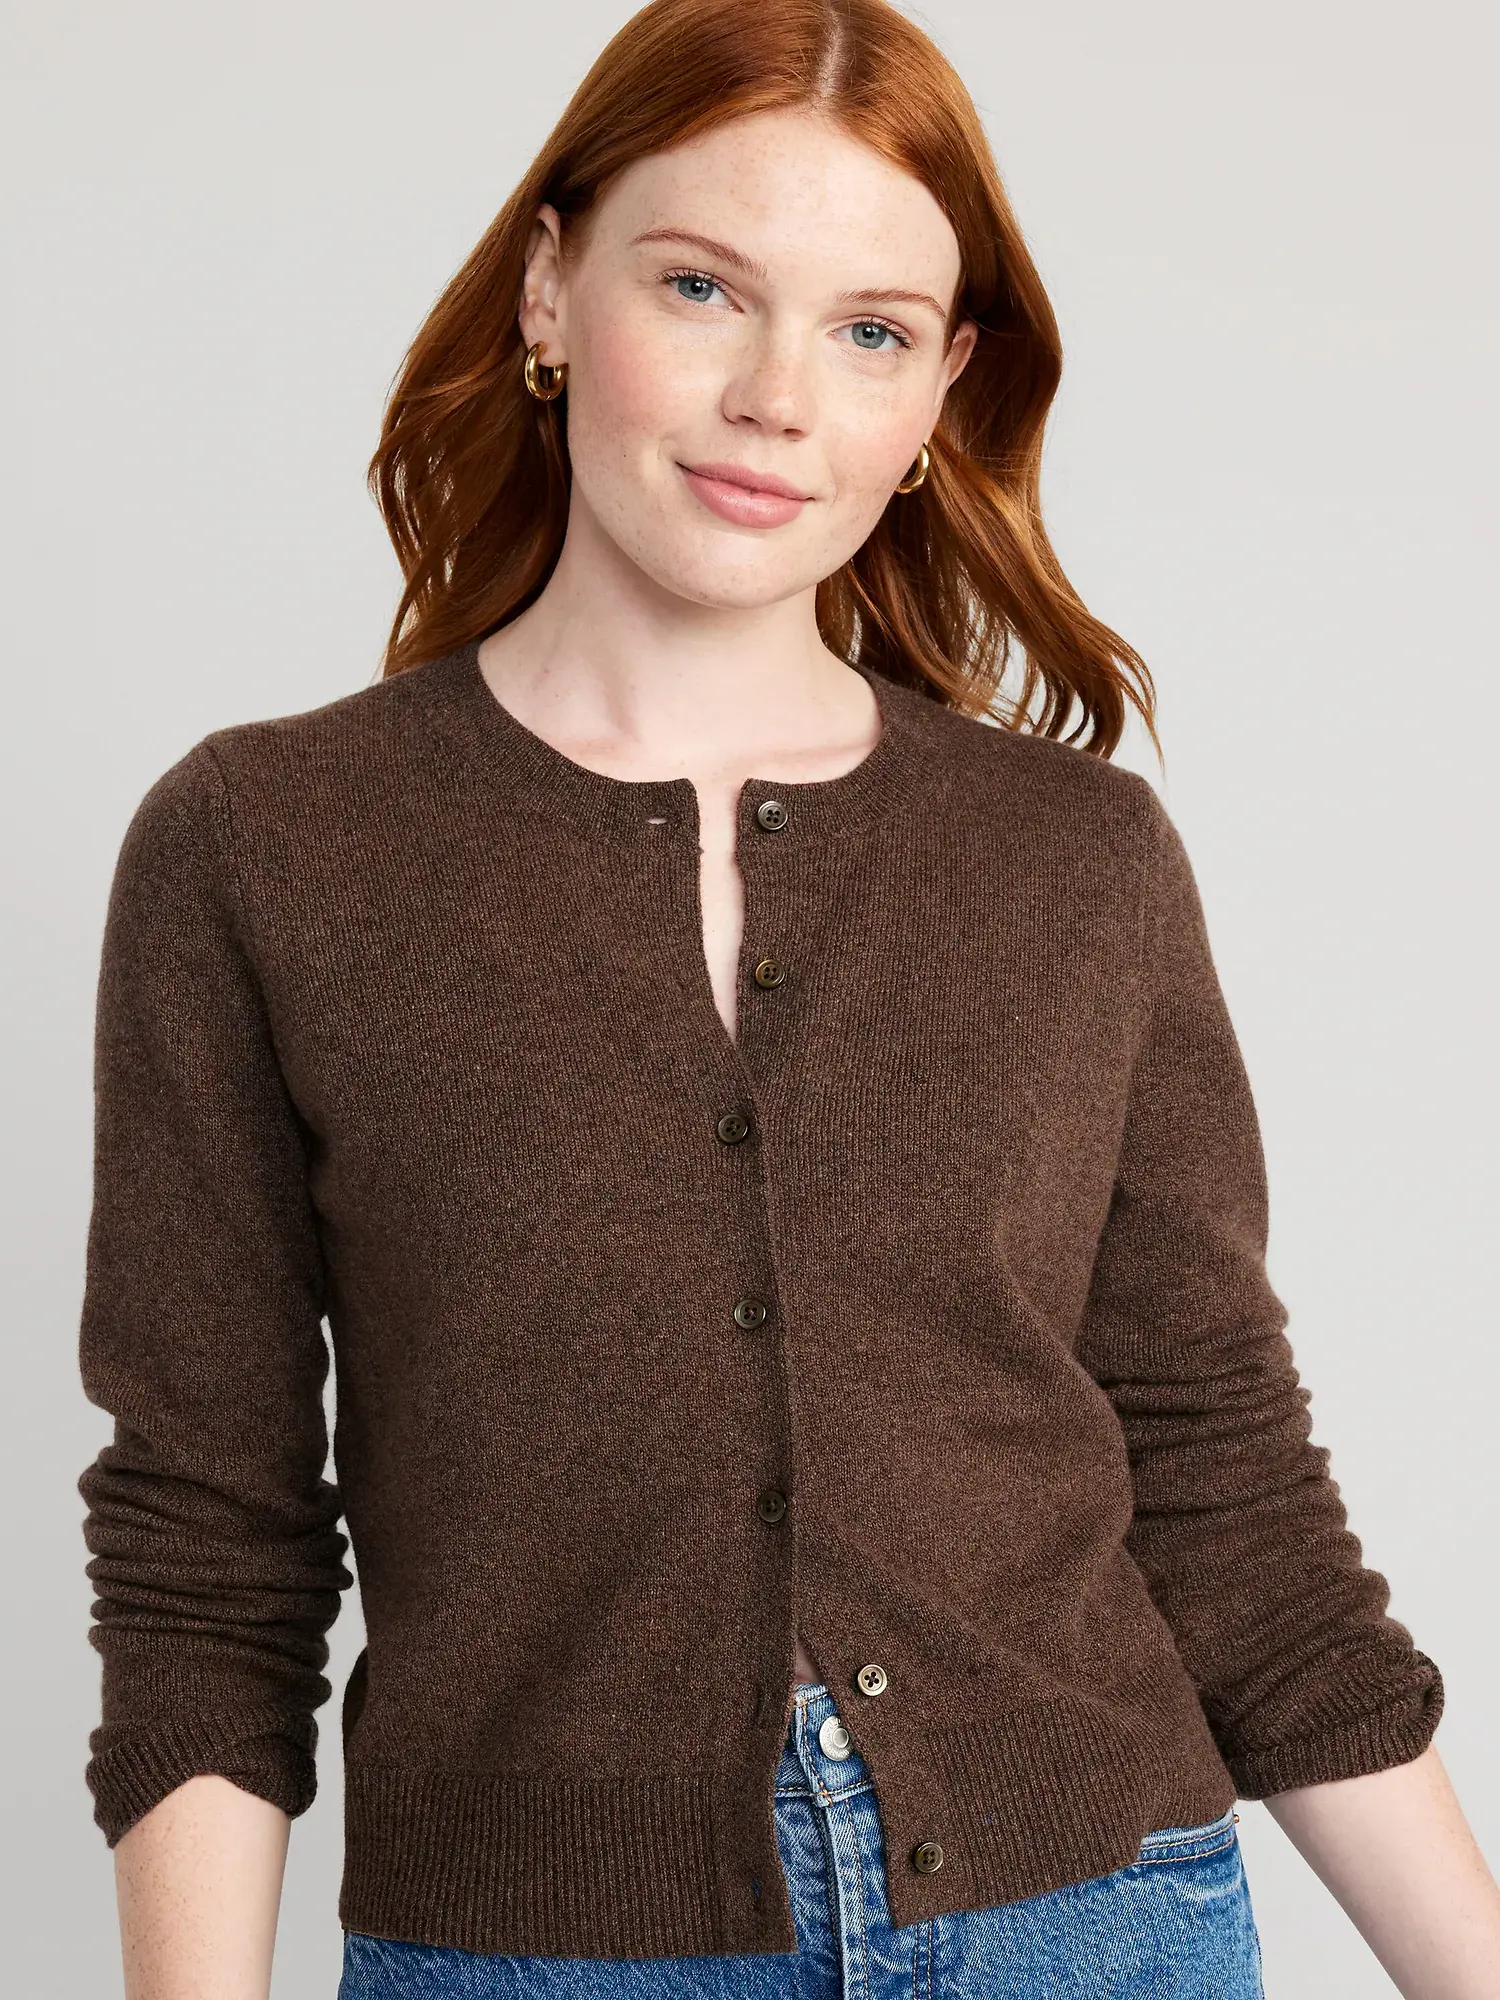 Old Navy SoSoft Cropped Cardigan Sweater for Women brown. 1